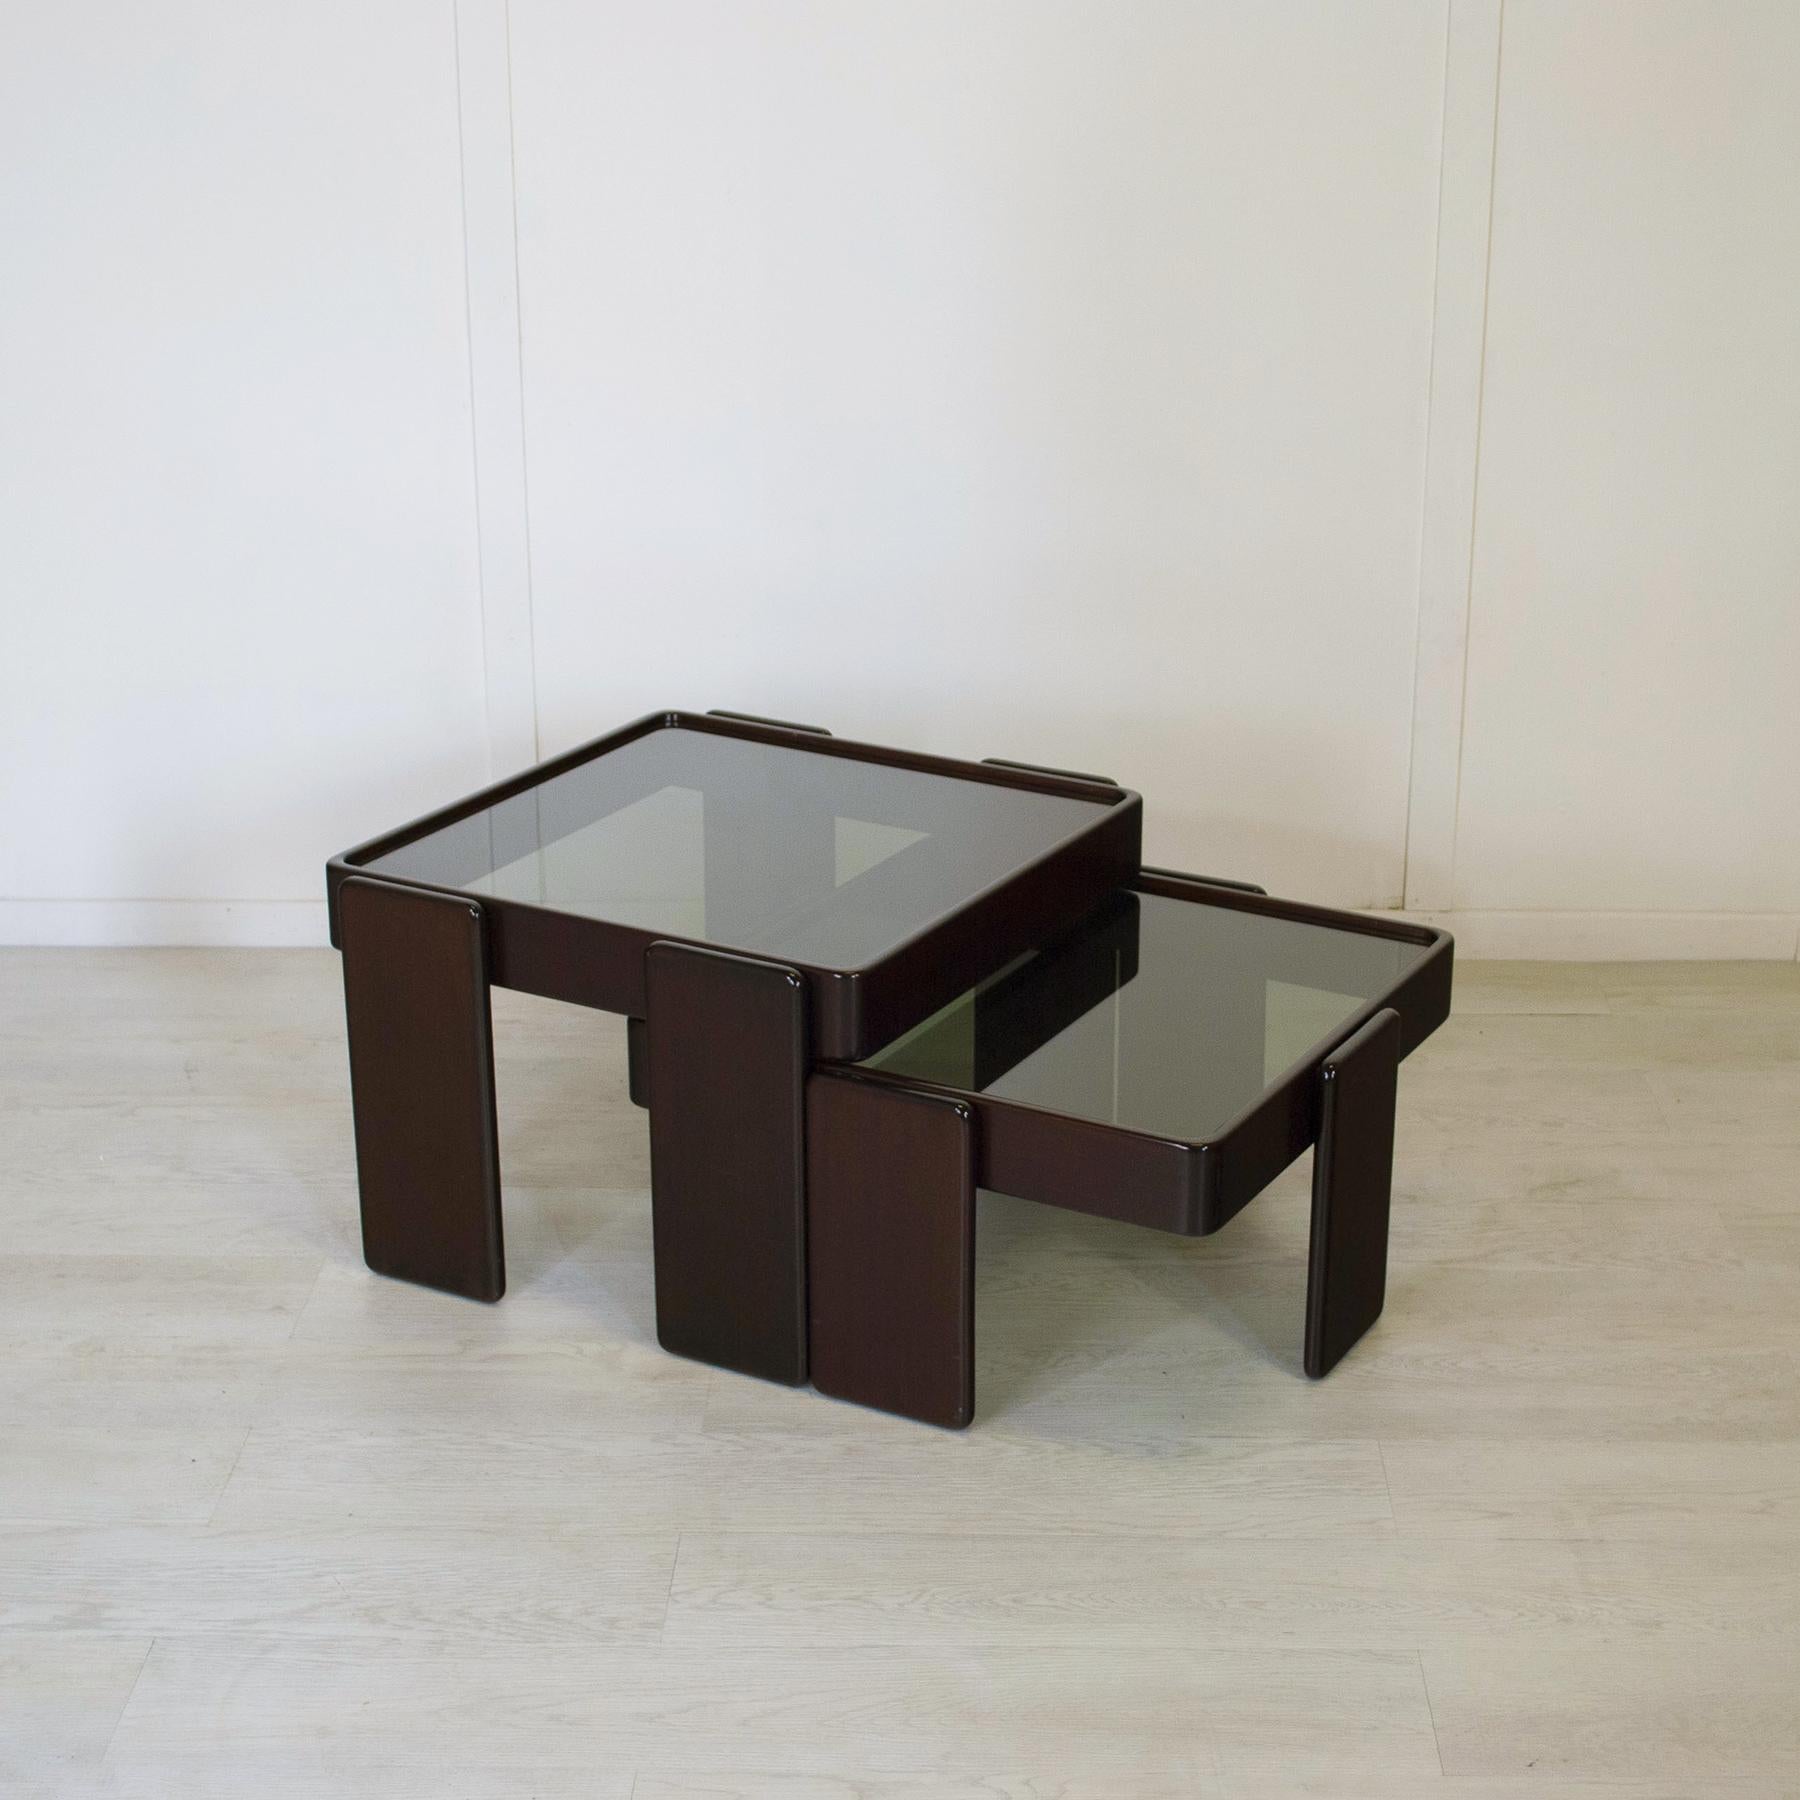 Lacquered Gianfranco Frattini for Cassina  set of two coffee table mid 60s. For Sale